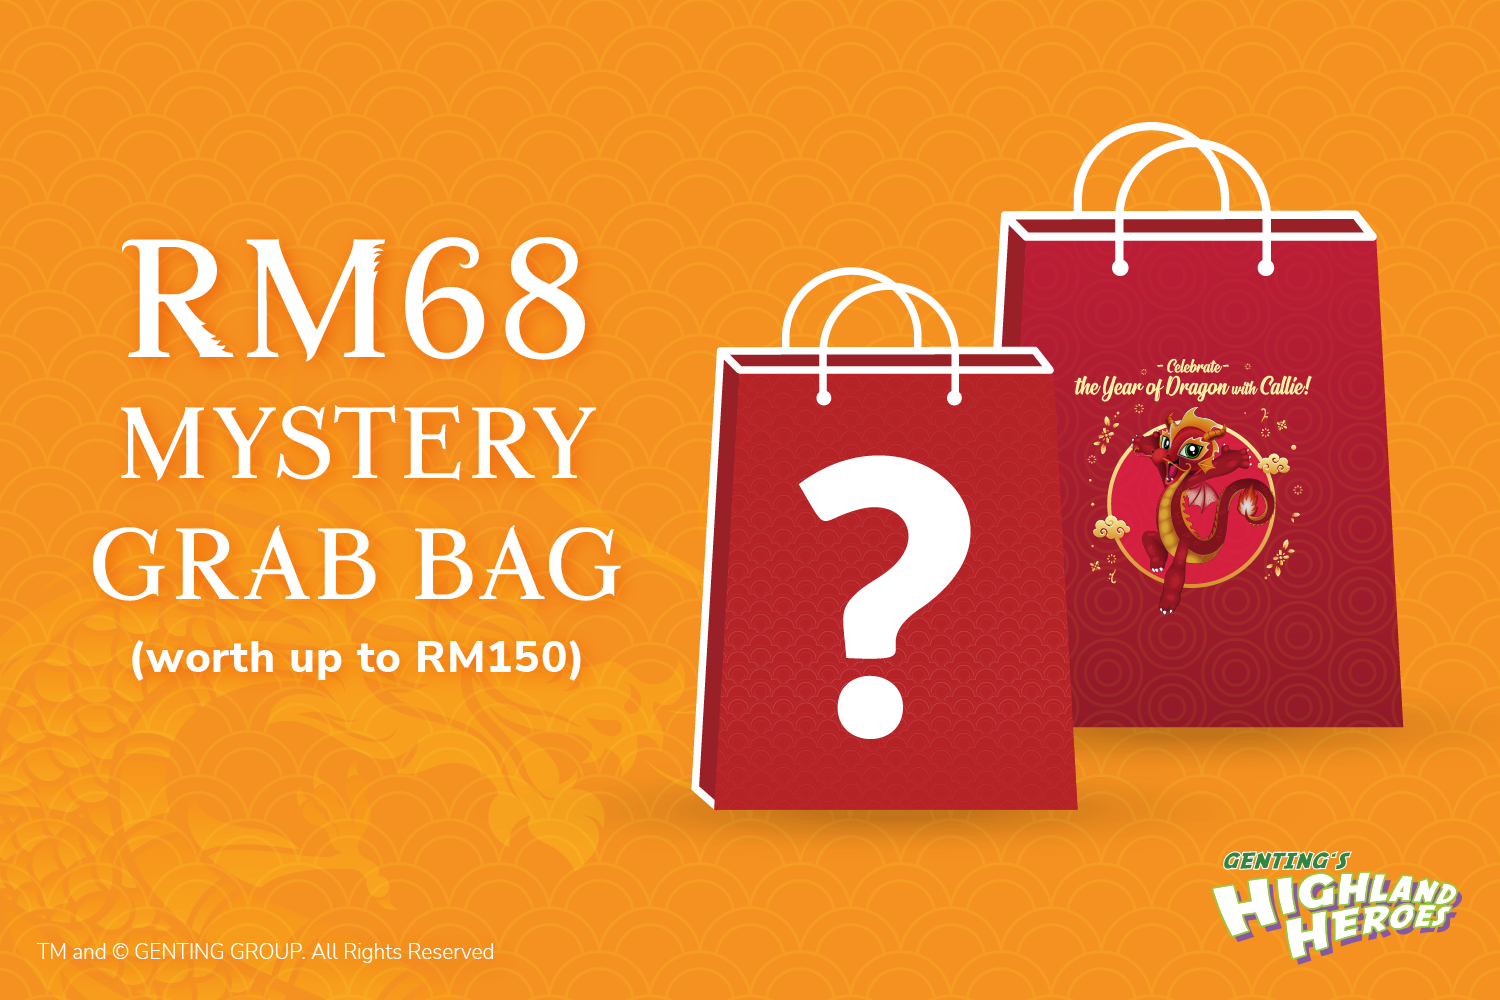 RM68 Mystery Grab Bag (worth up to RM150):